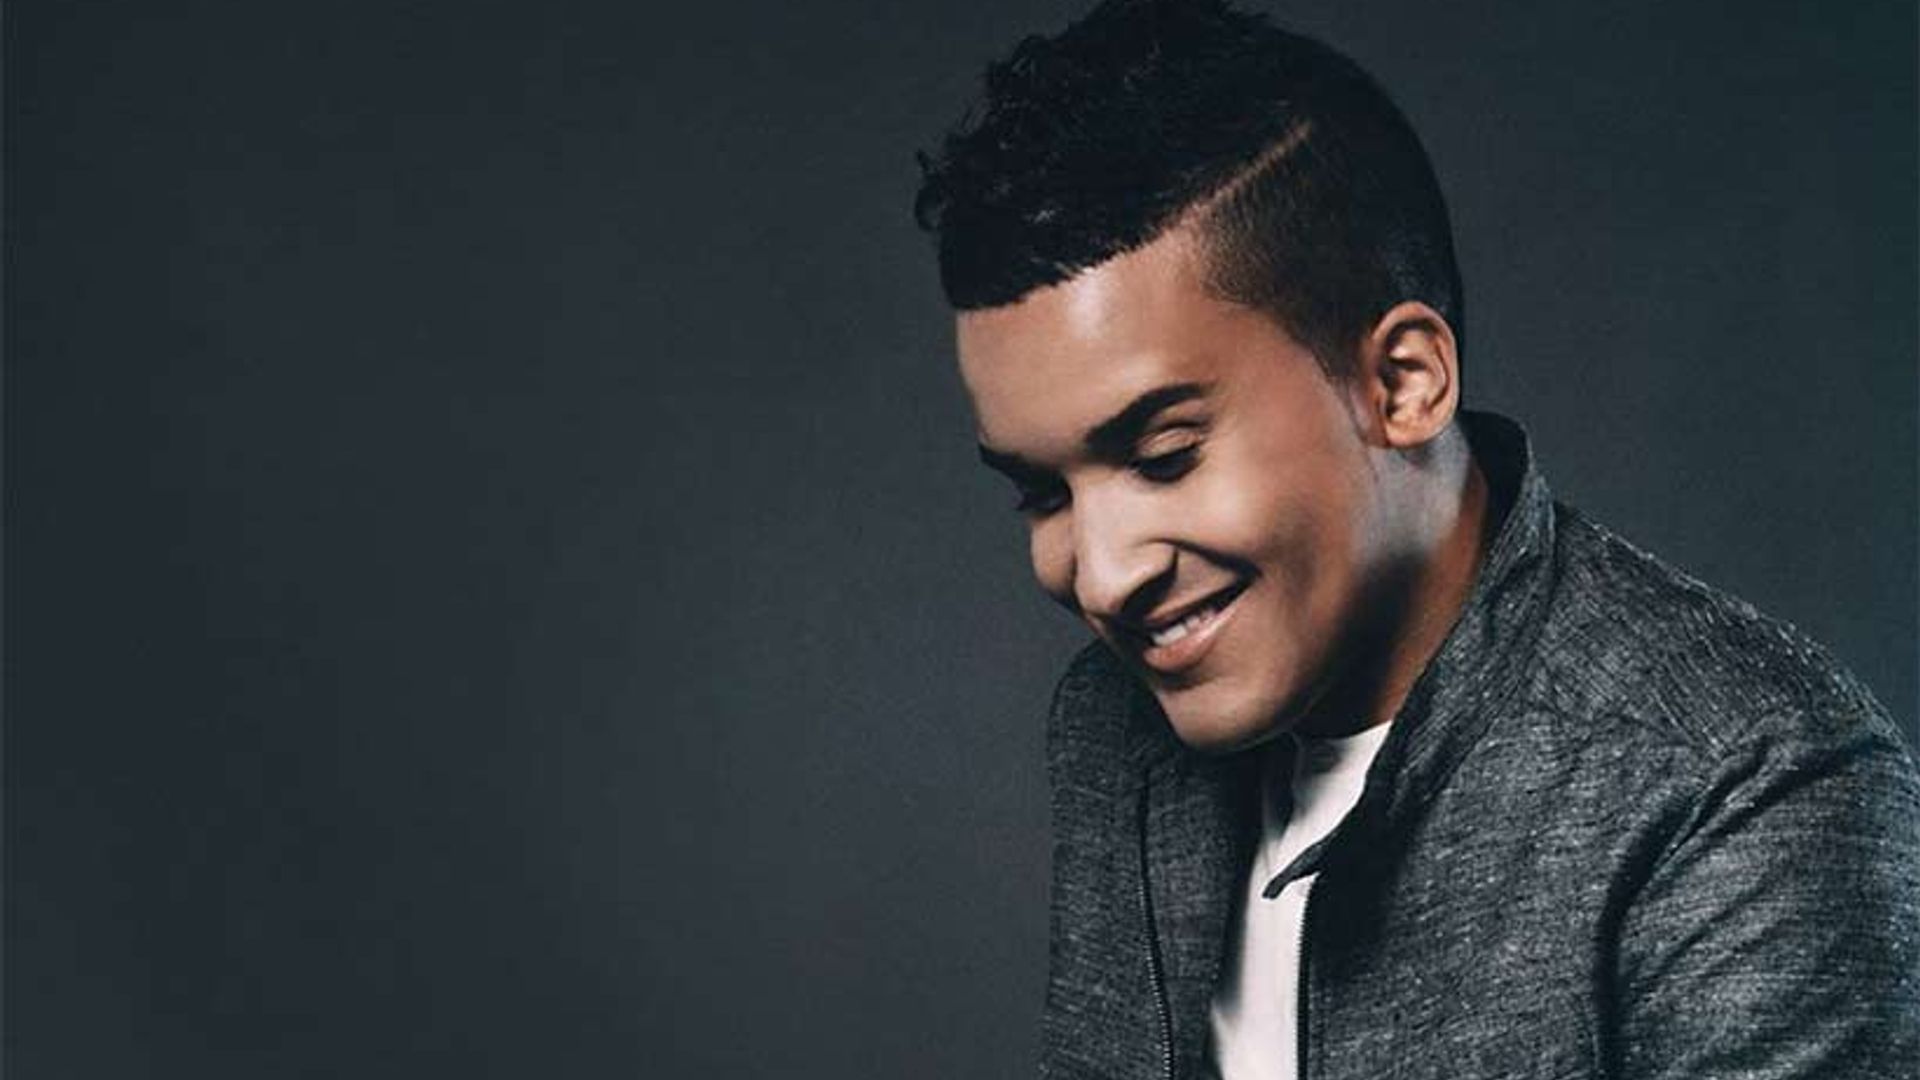 X Factor's Jahmene Douglas has teamed up with a Hollywood star for his latest music video